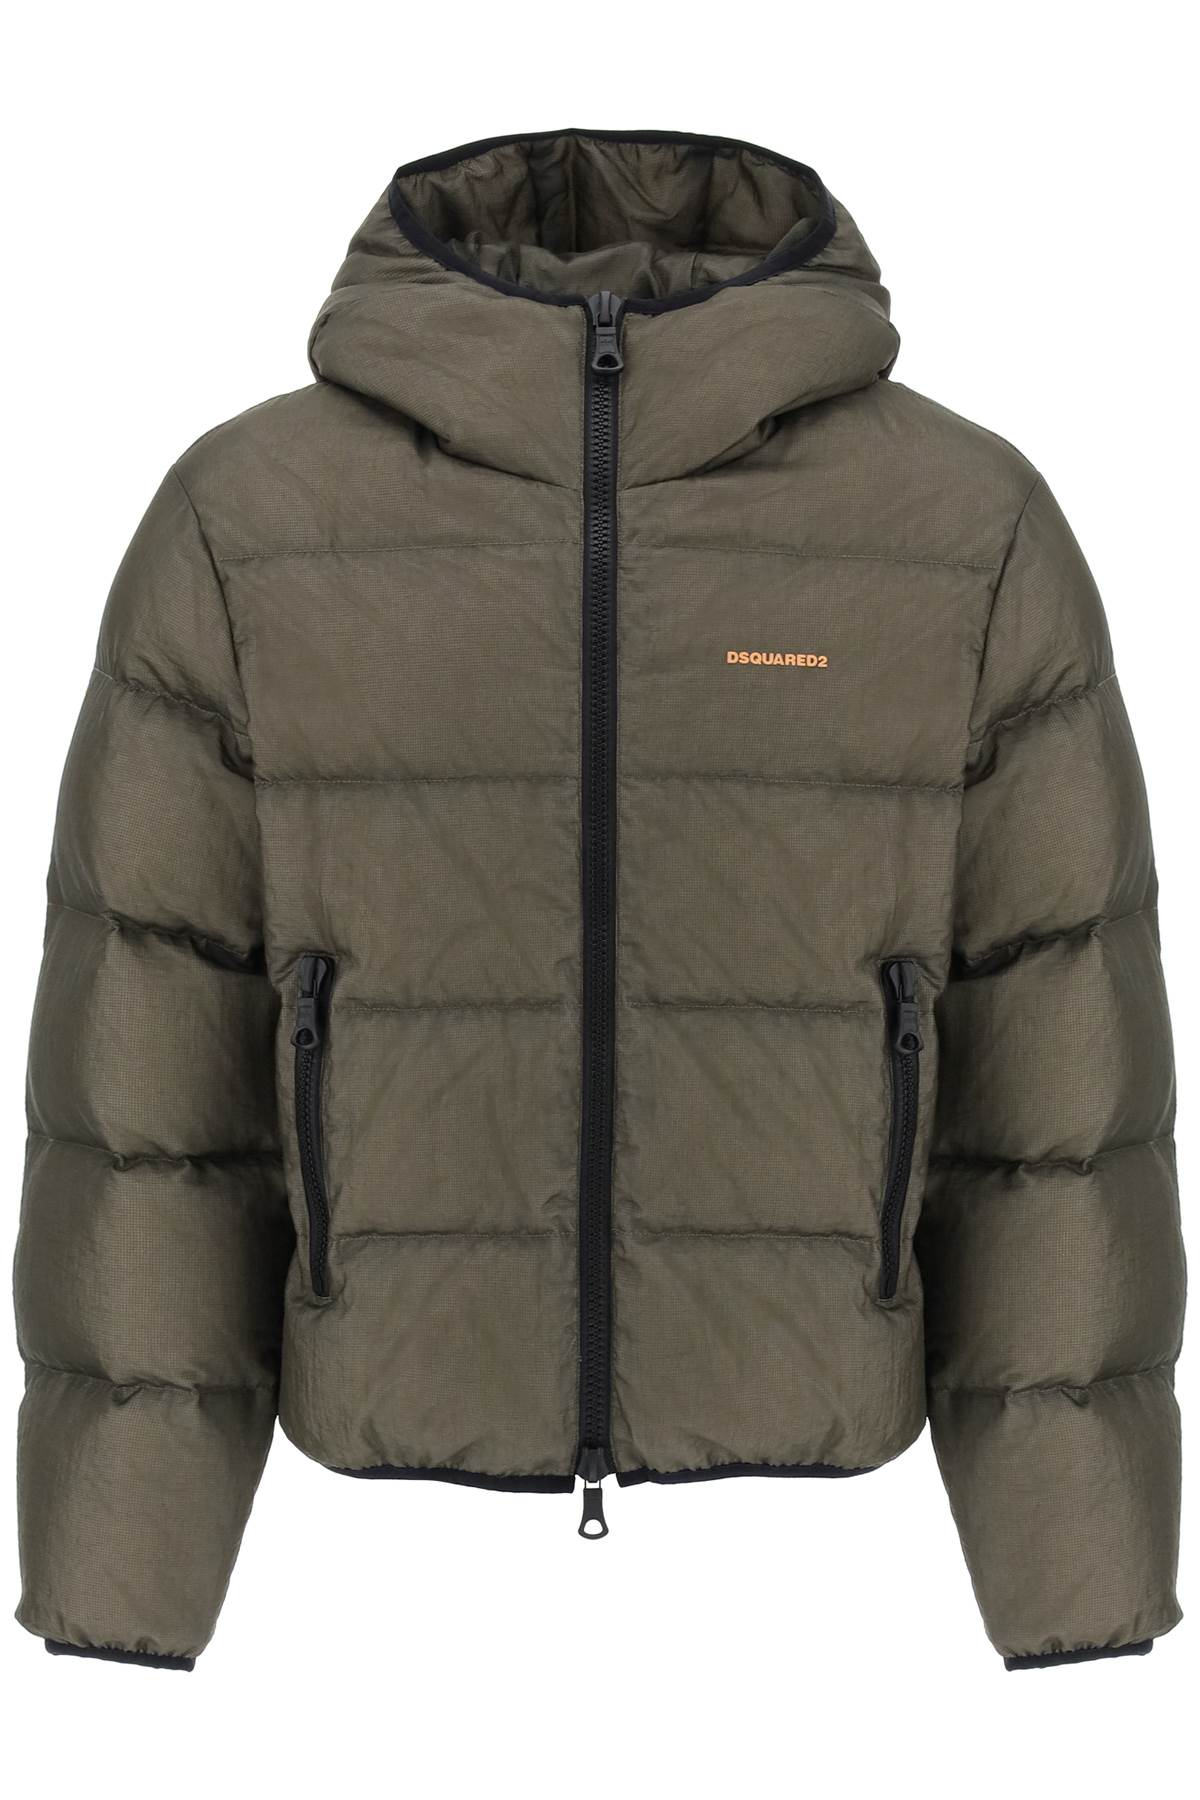 Dsquared2 ripstop puffer jacket-0